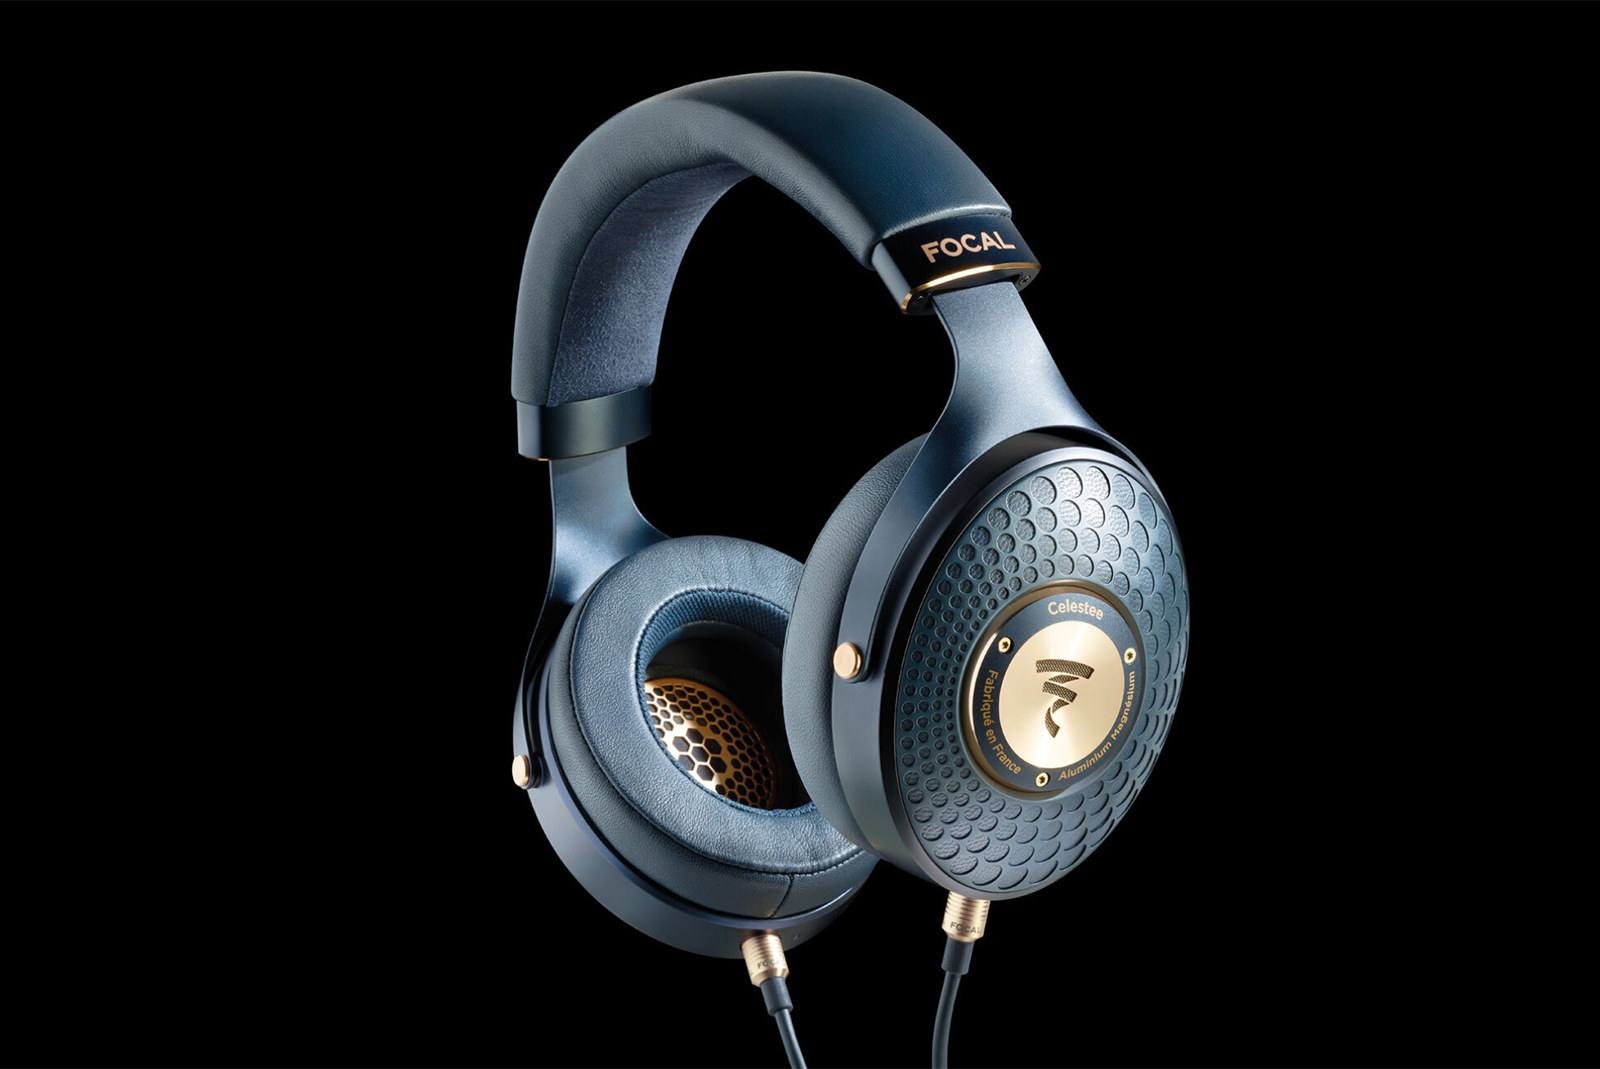 Focal rounds out its luxe headphone lineup with the 999 Celestee photo 1